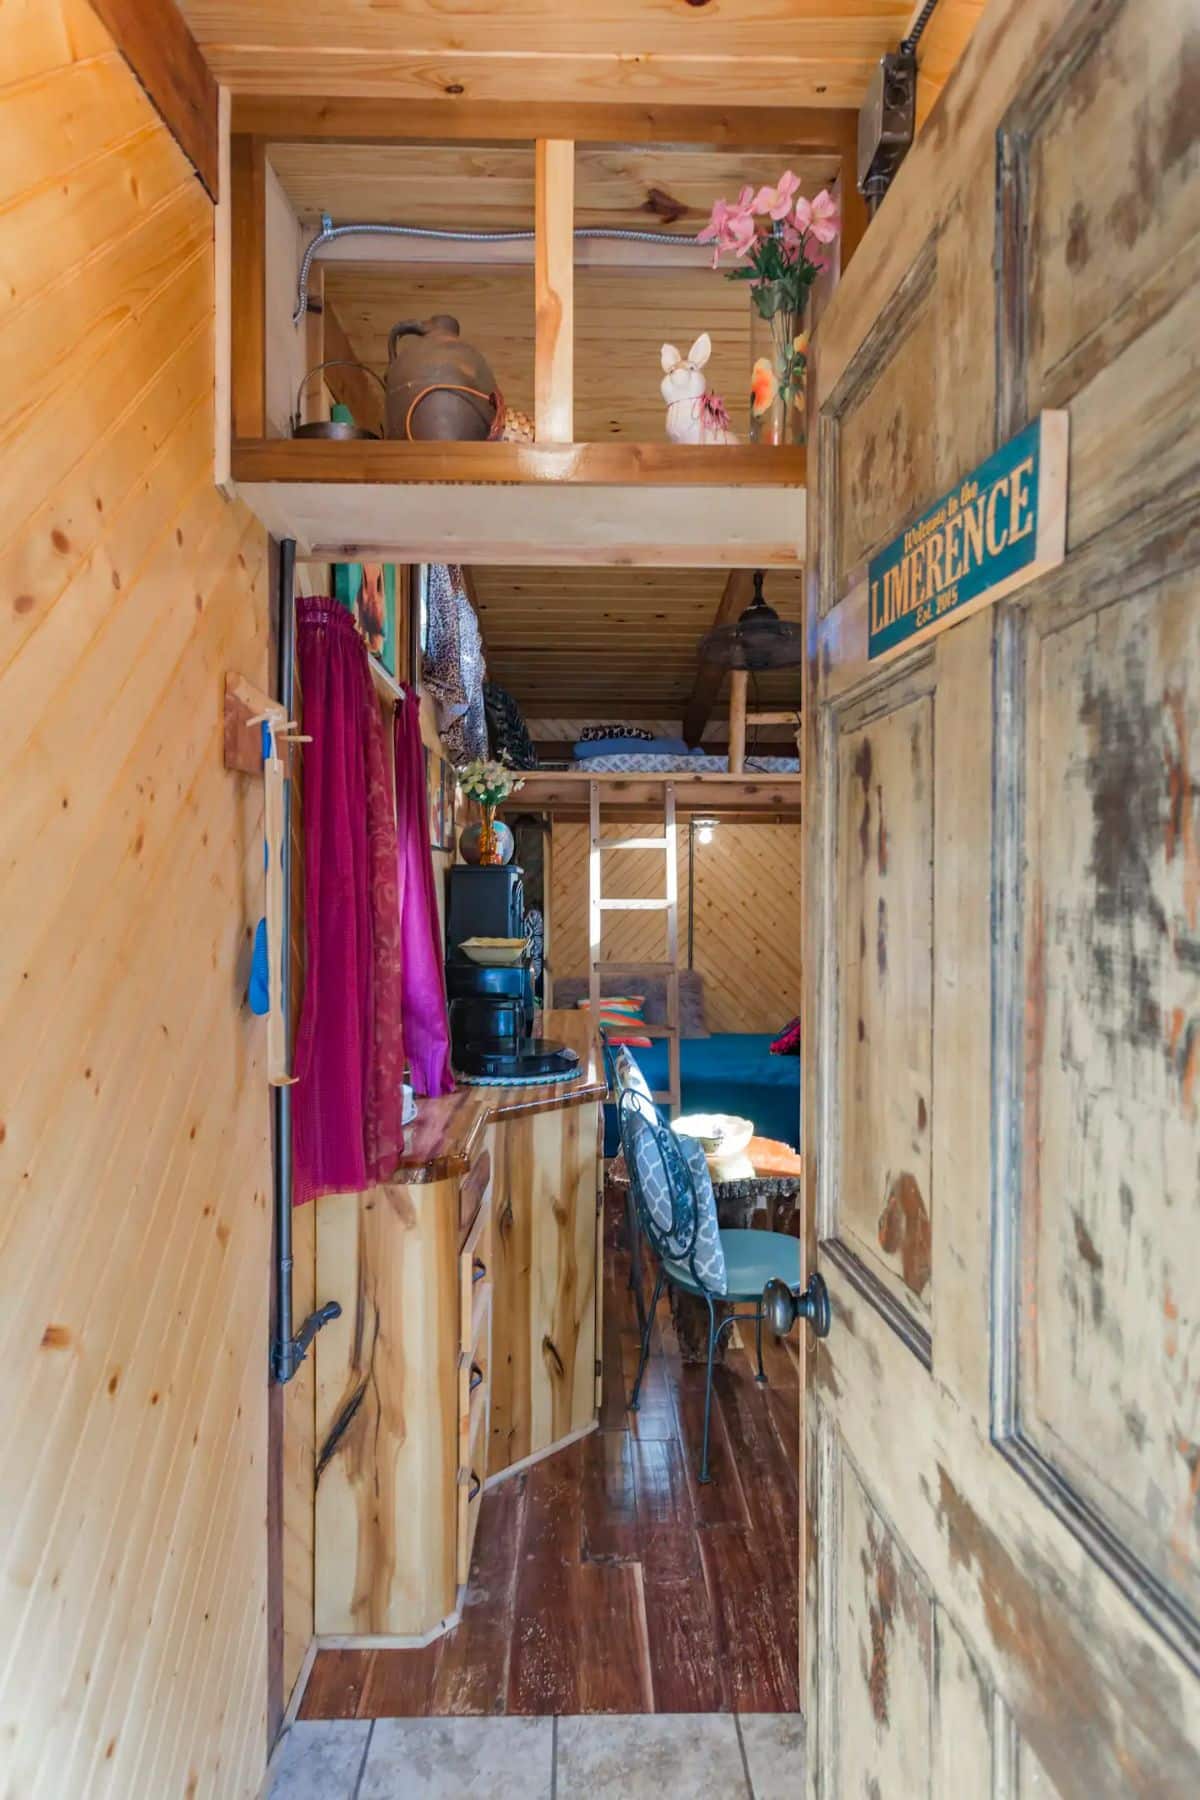 open door leading into the rustic tiny home